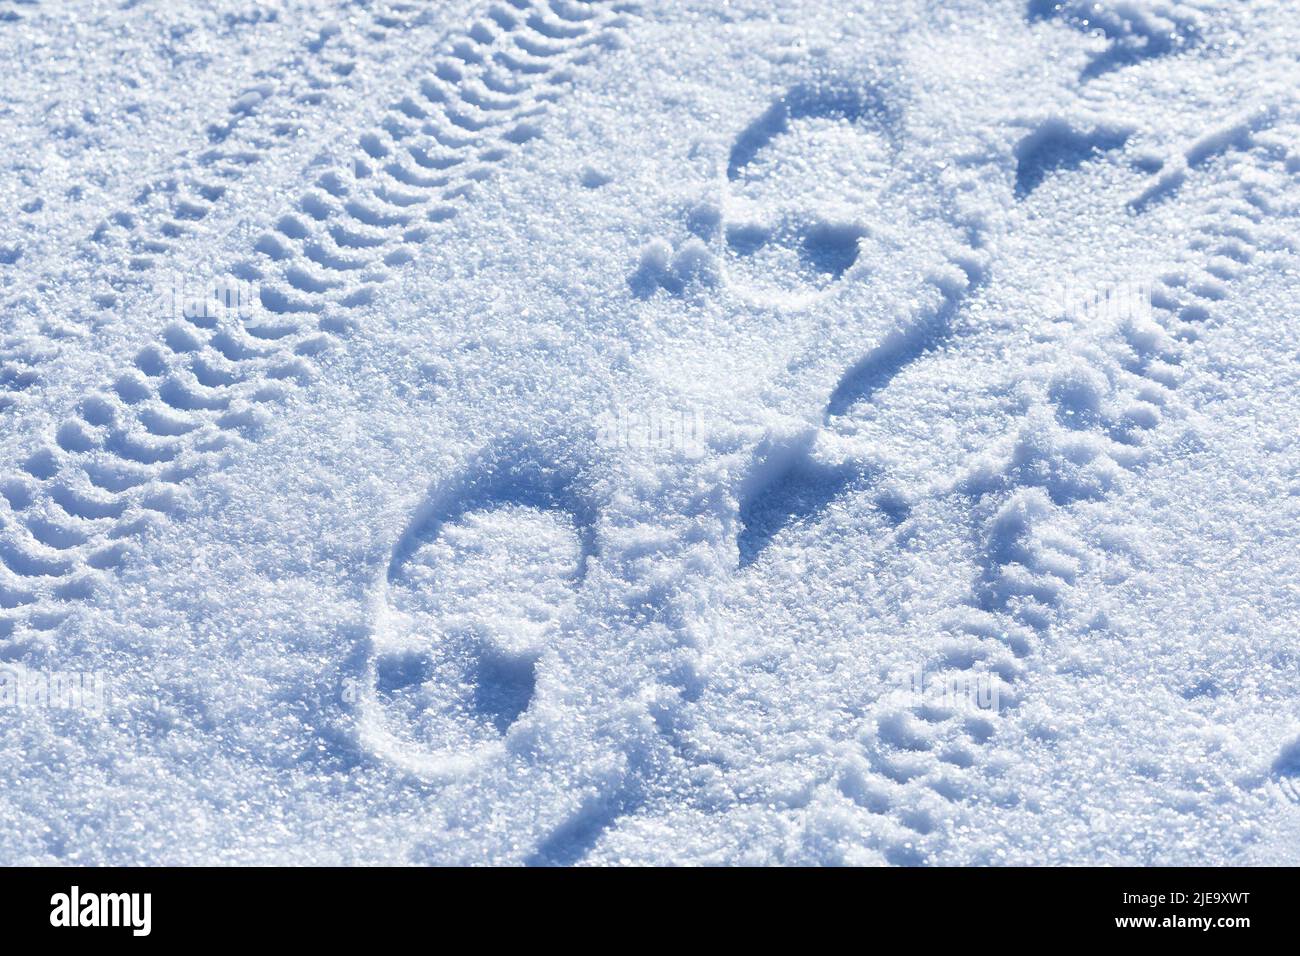 A winter road with shoe footprints, tracks wheel tire tread on white blue fluffy snow background. Fragment of the snowy surface of the earth after the Stock Photo